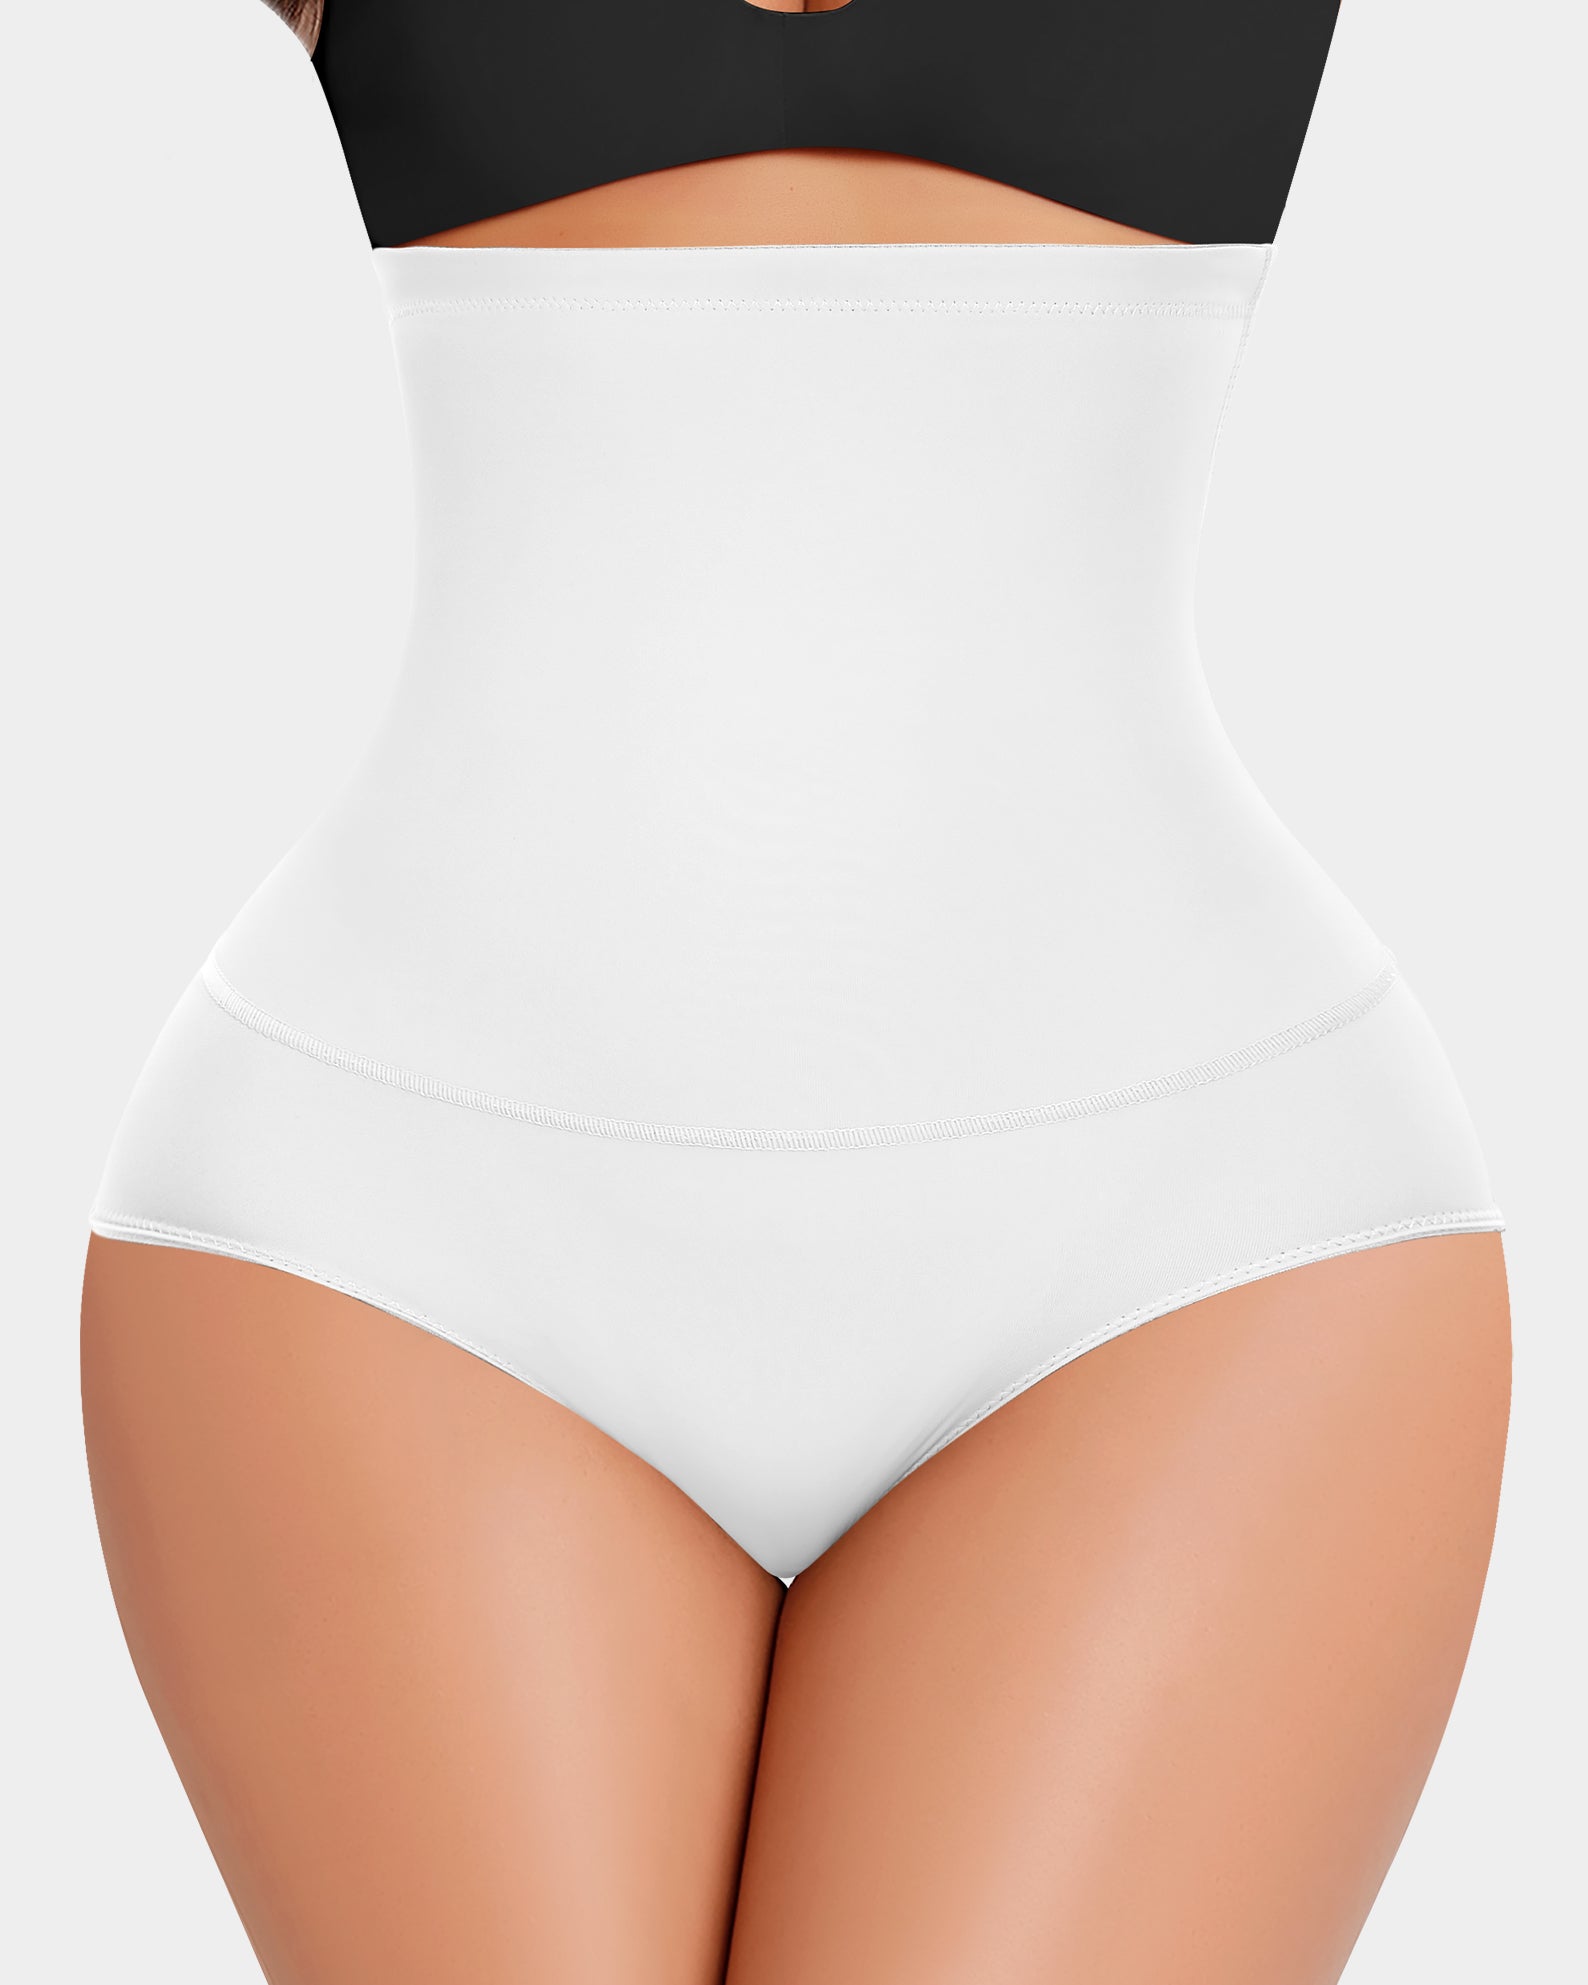 Werena tummy control thong 2.0, see the details- it's a high waist ve, Shape Wear